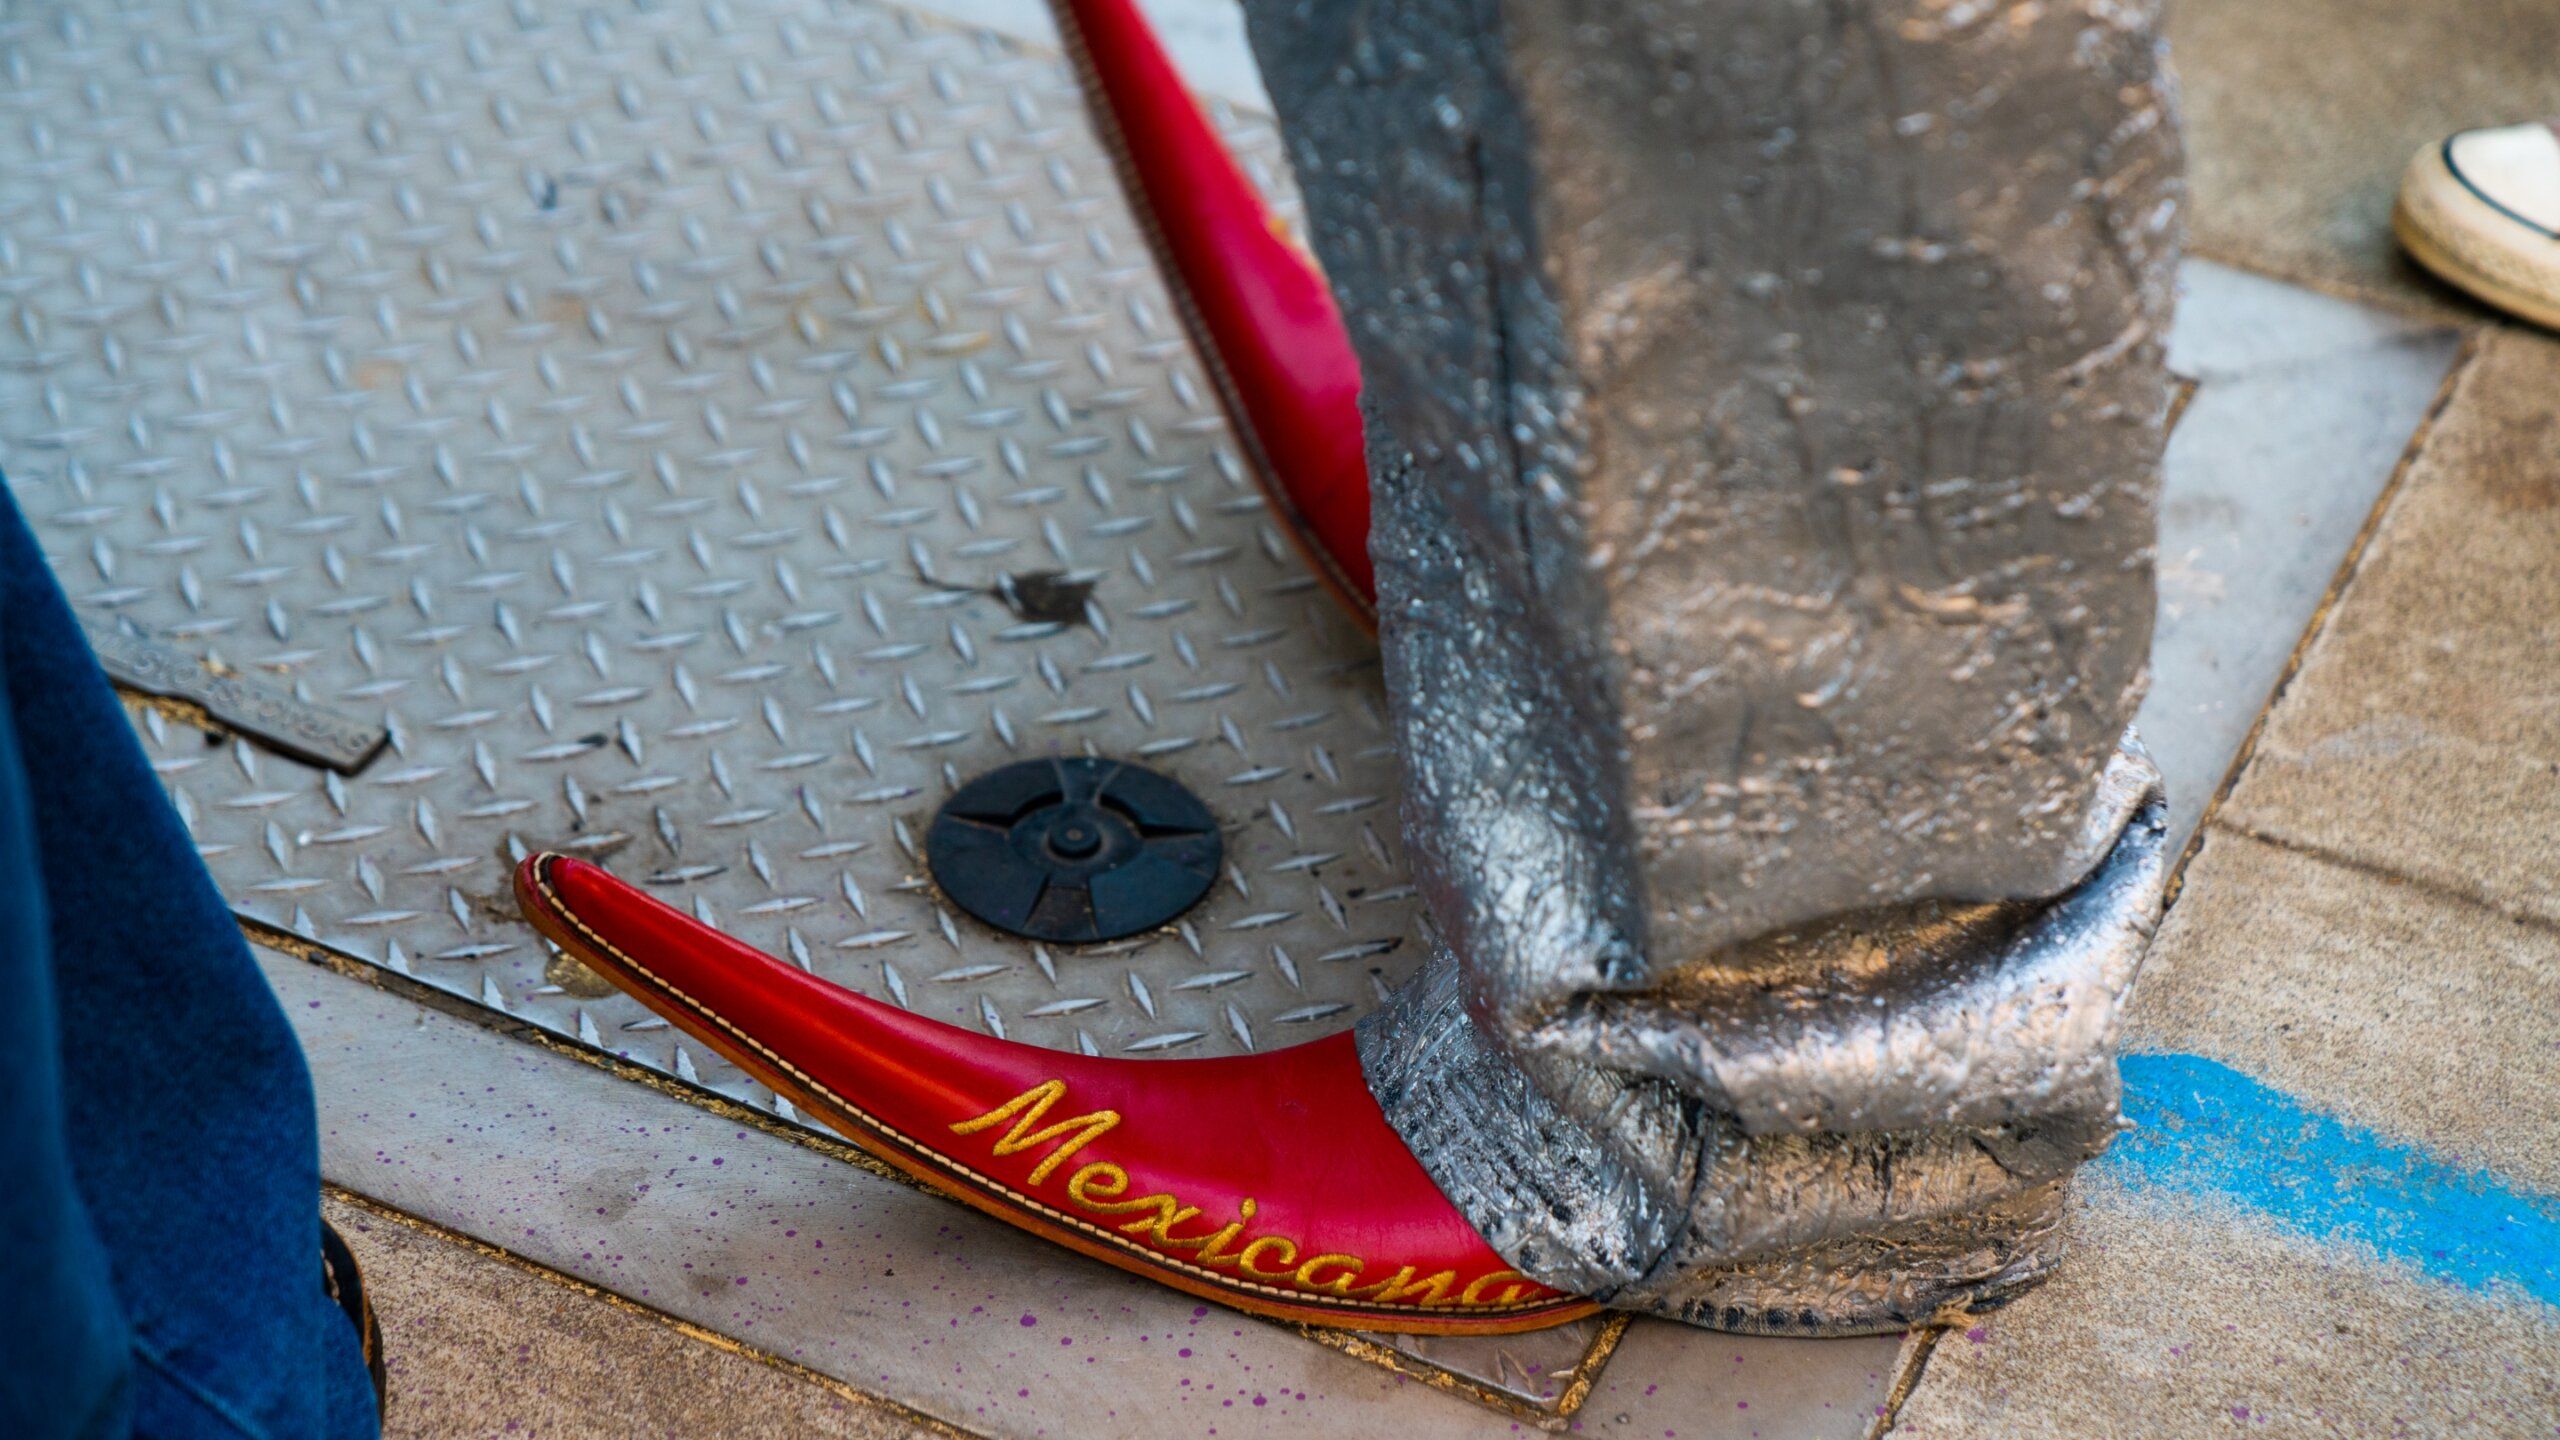 close up of red Botas picudas that say Mexicano on them on city sidewalk.